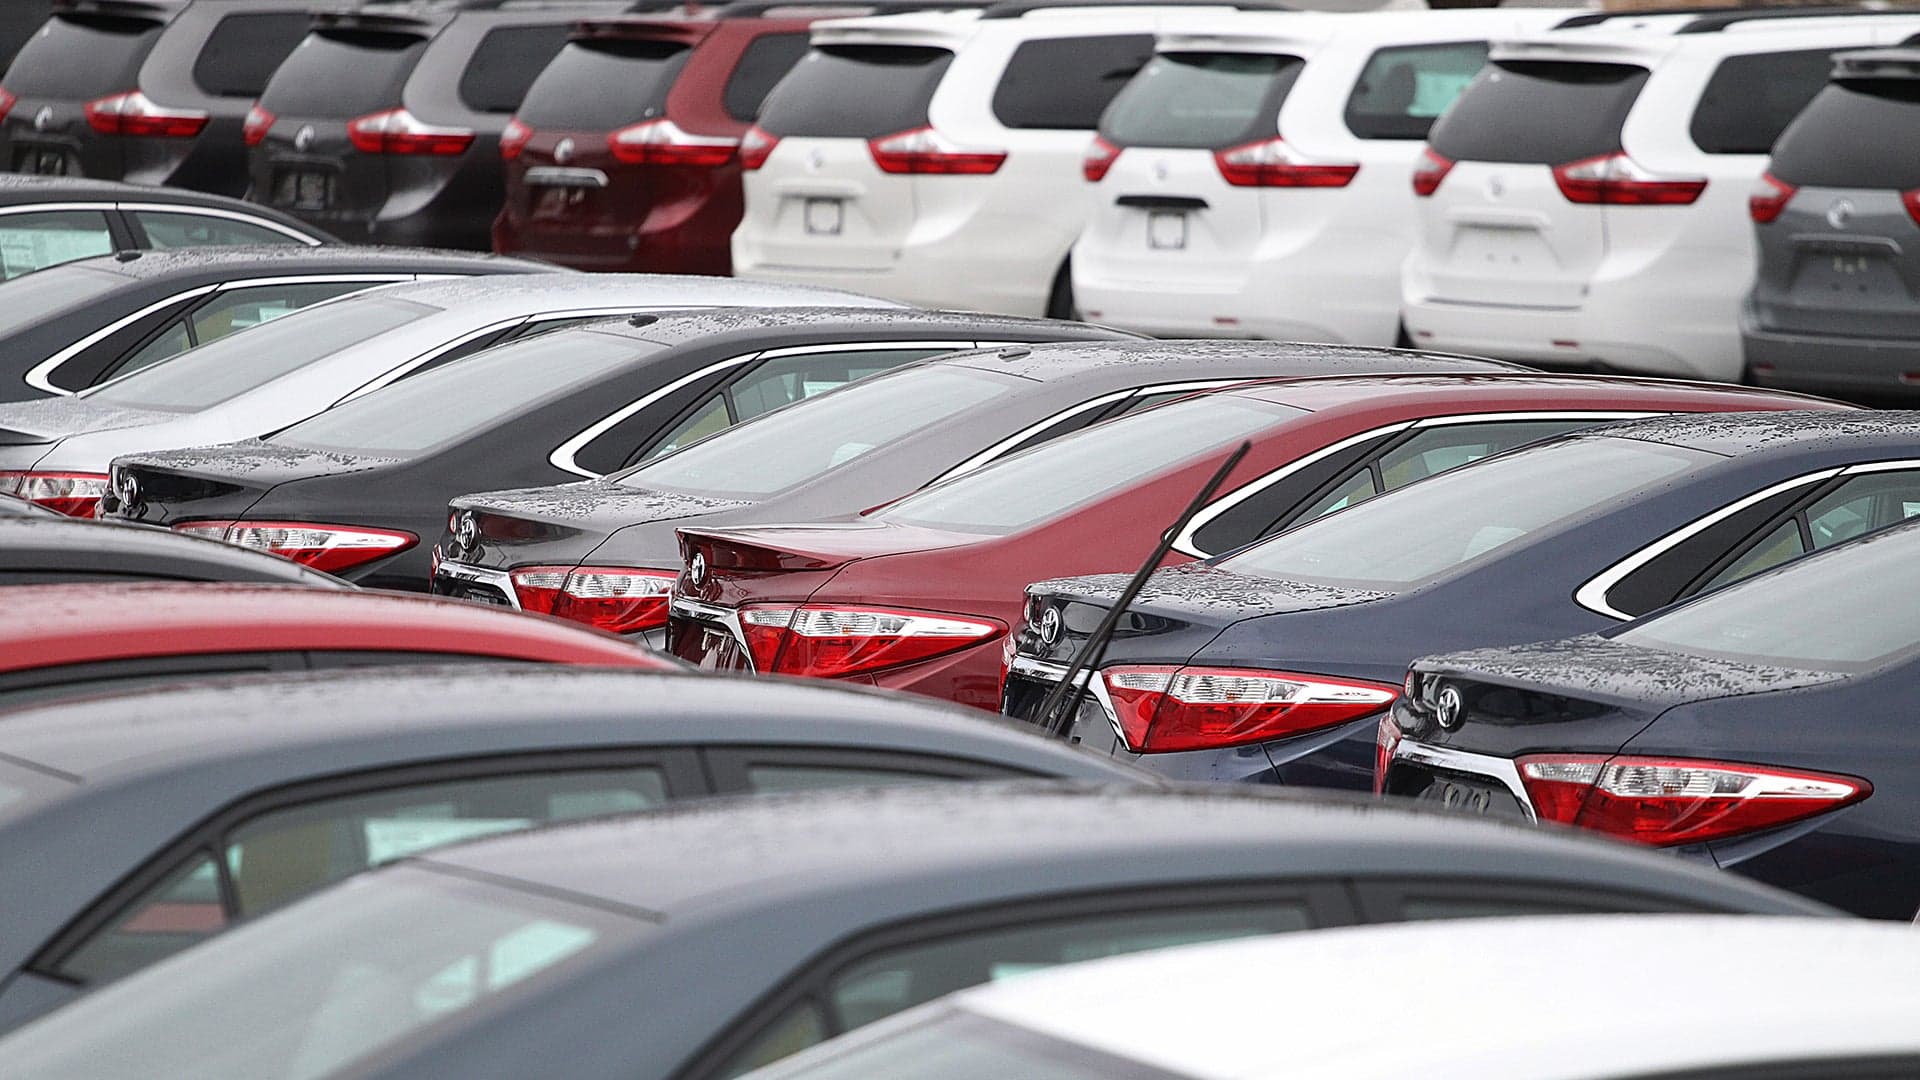 Black Friday: Good Day for Buying, Bad Time for Browsing at Car Dealerships